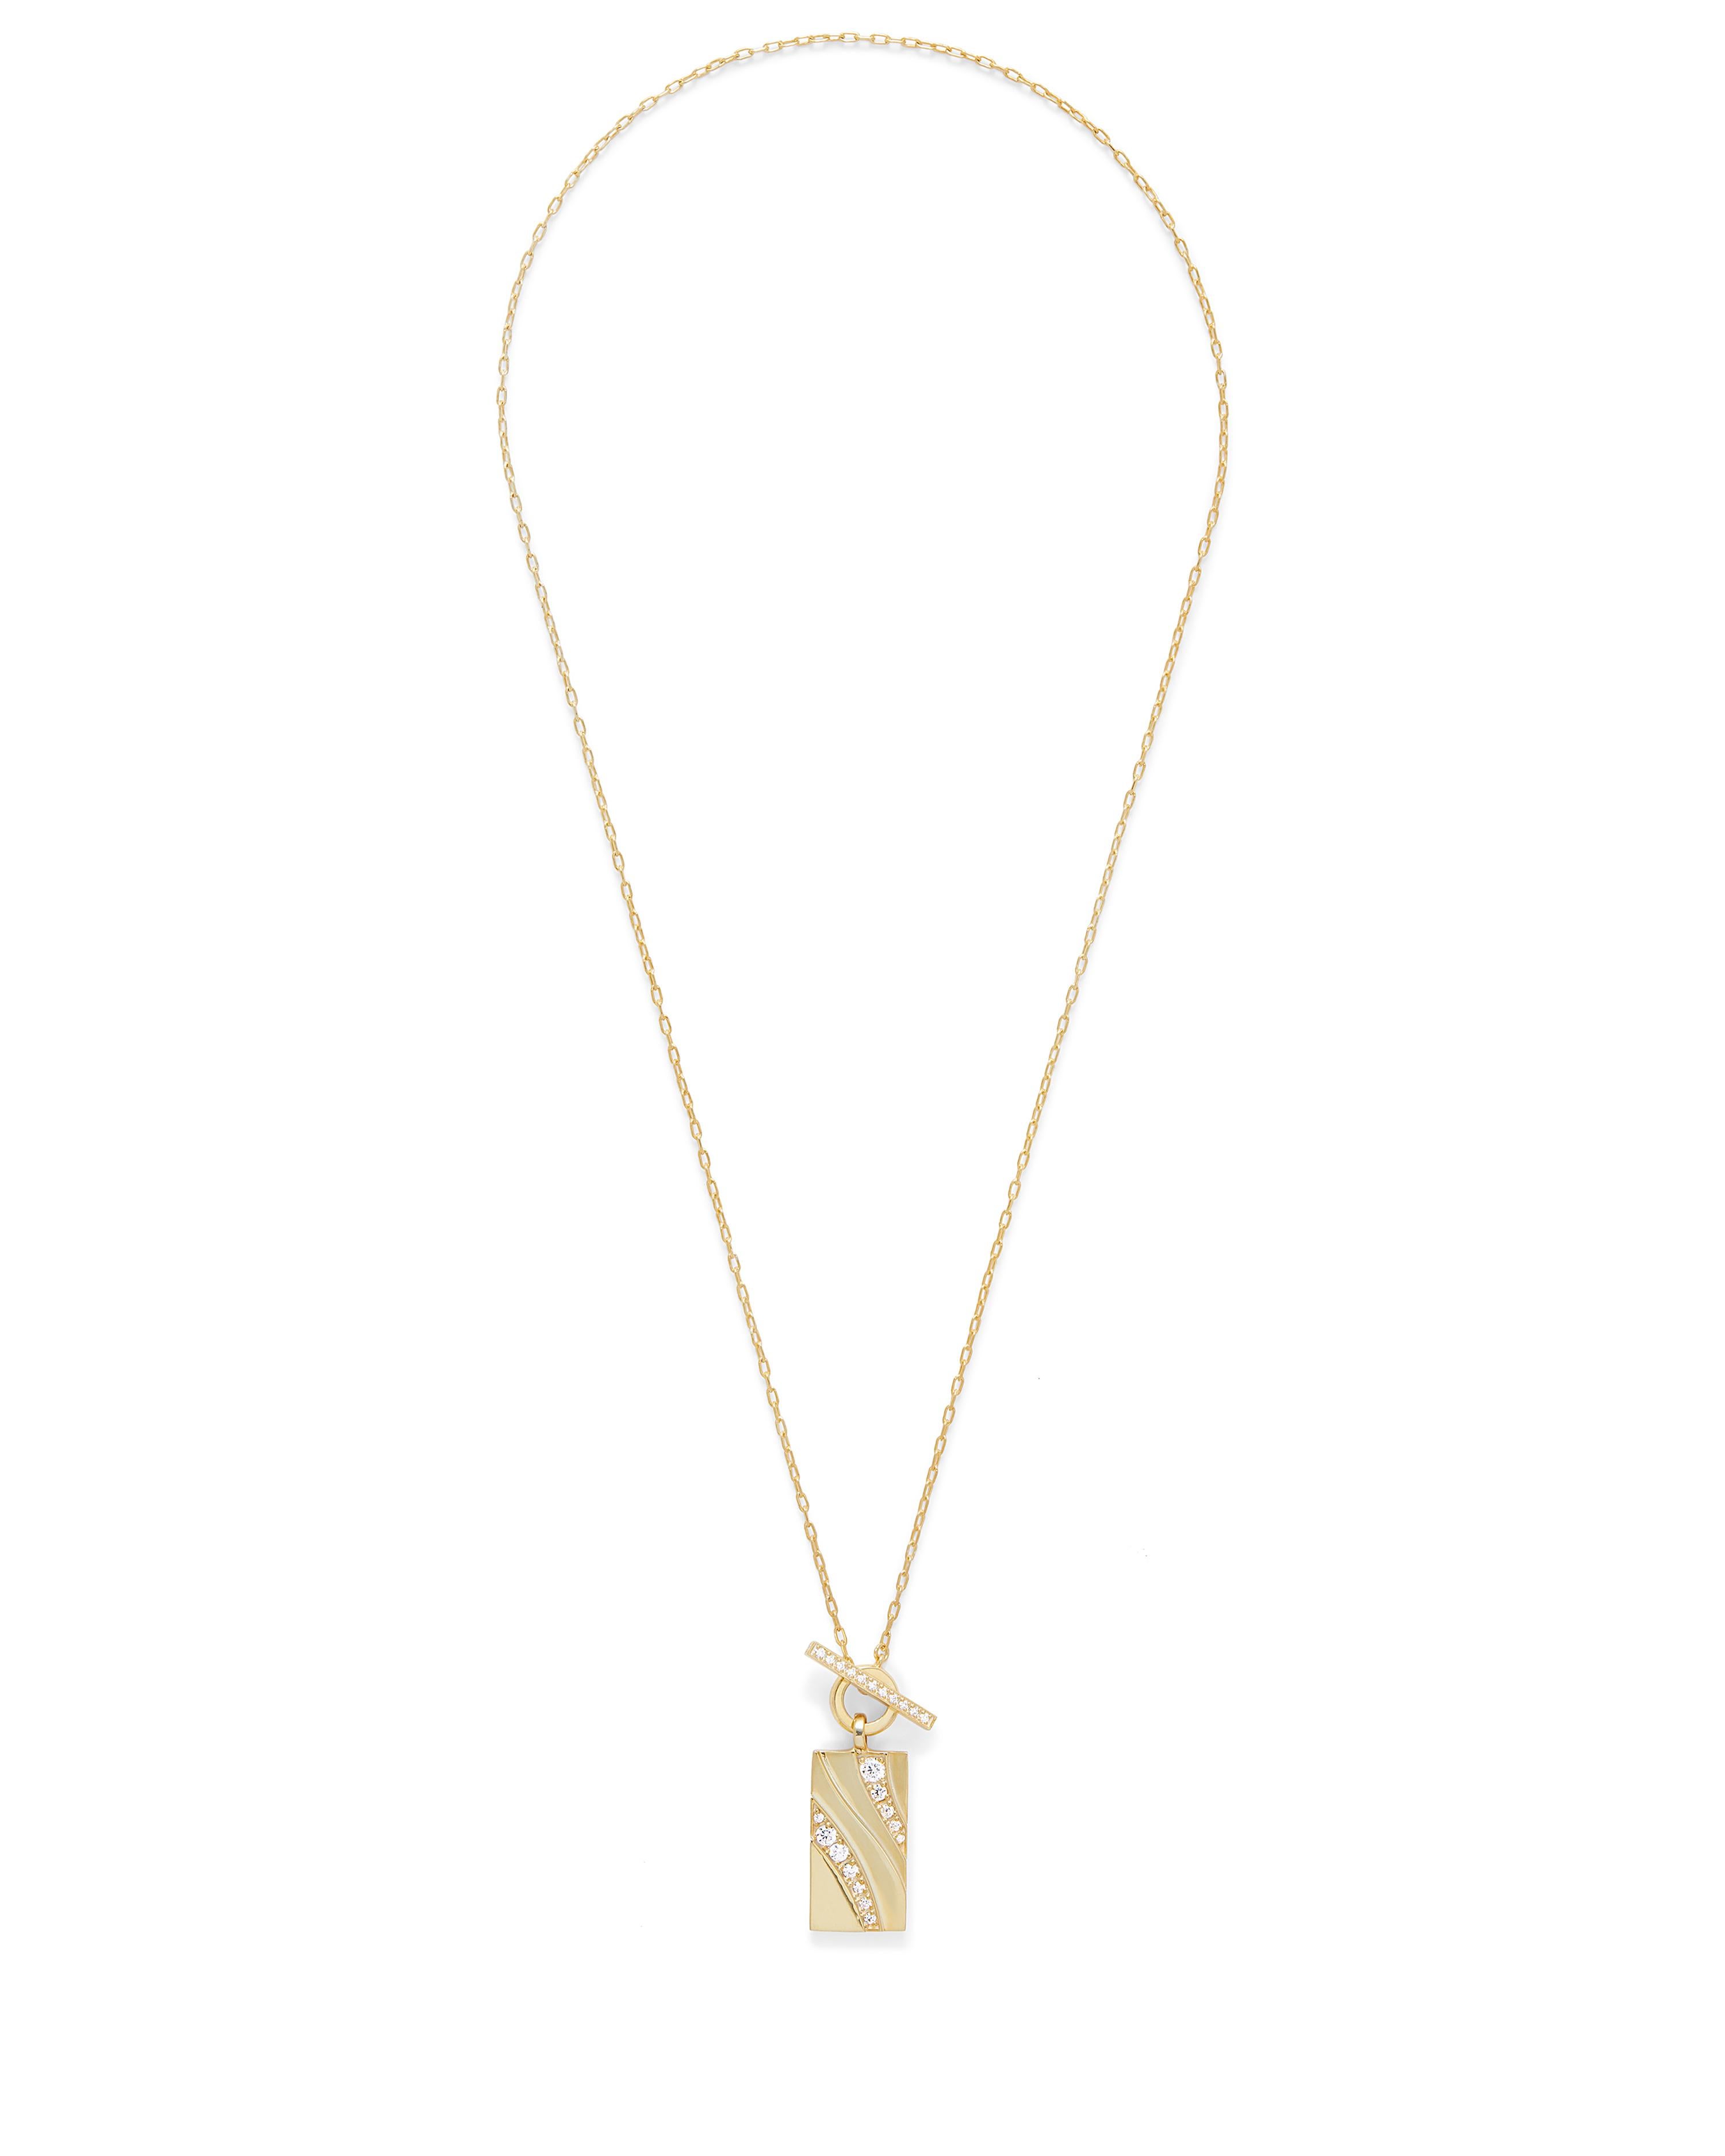 Rectangular pendant with graceful curving lines and tiered detail accented with pave diamond. The necklace features a toggle style closure with pave diamonds. Total diamond weight is 1.6 carats. The chain length is 18